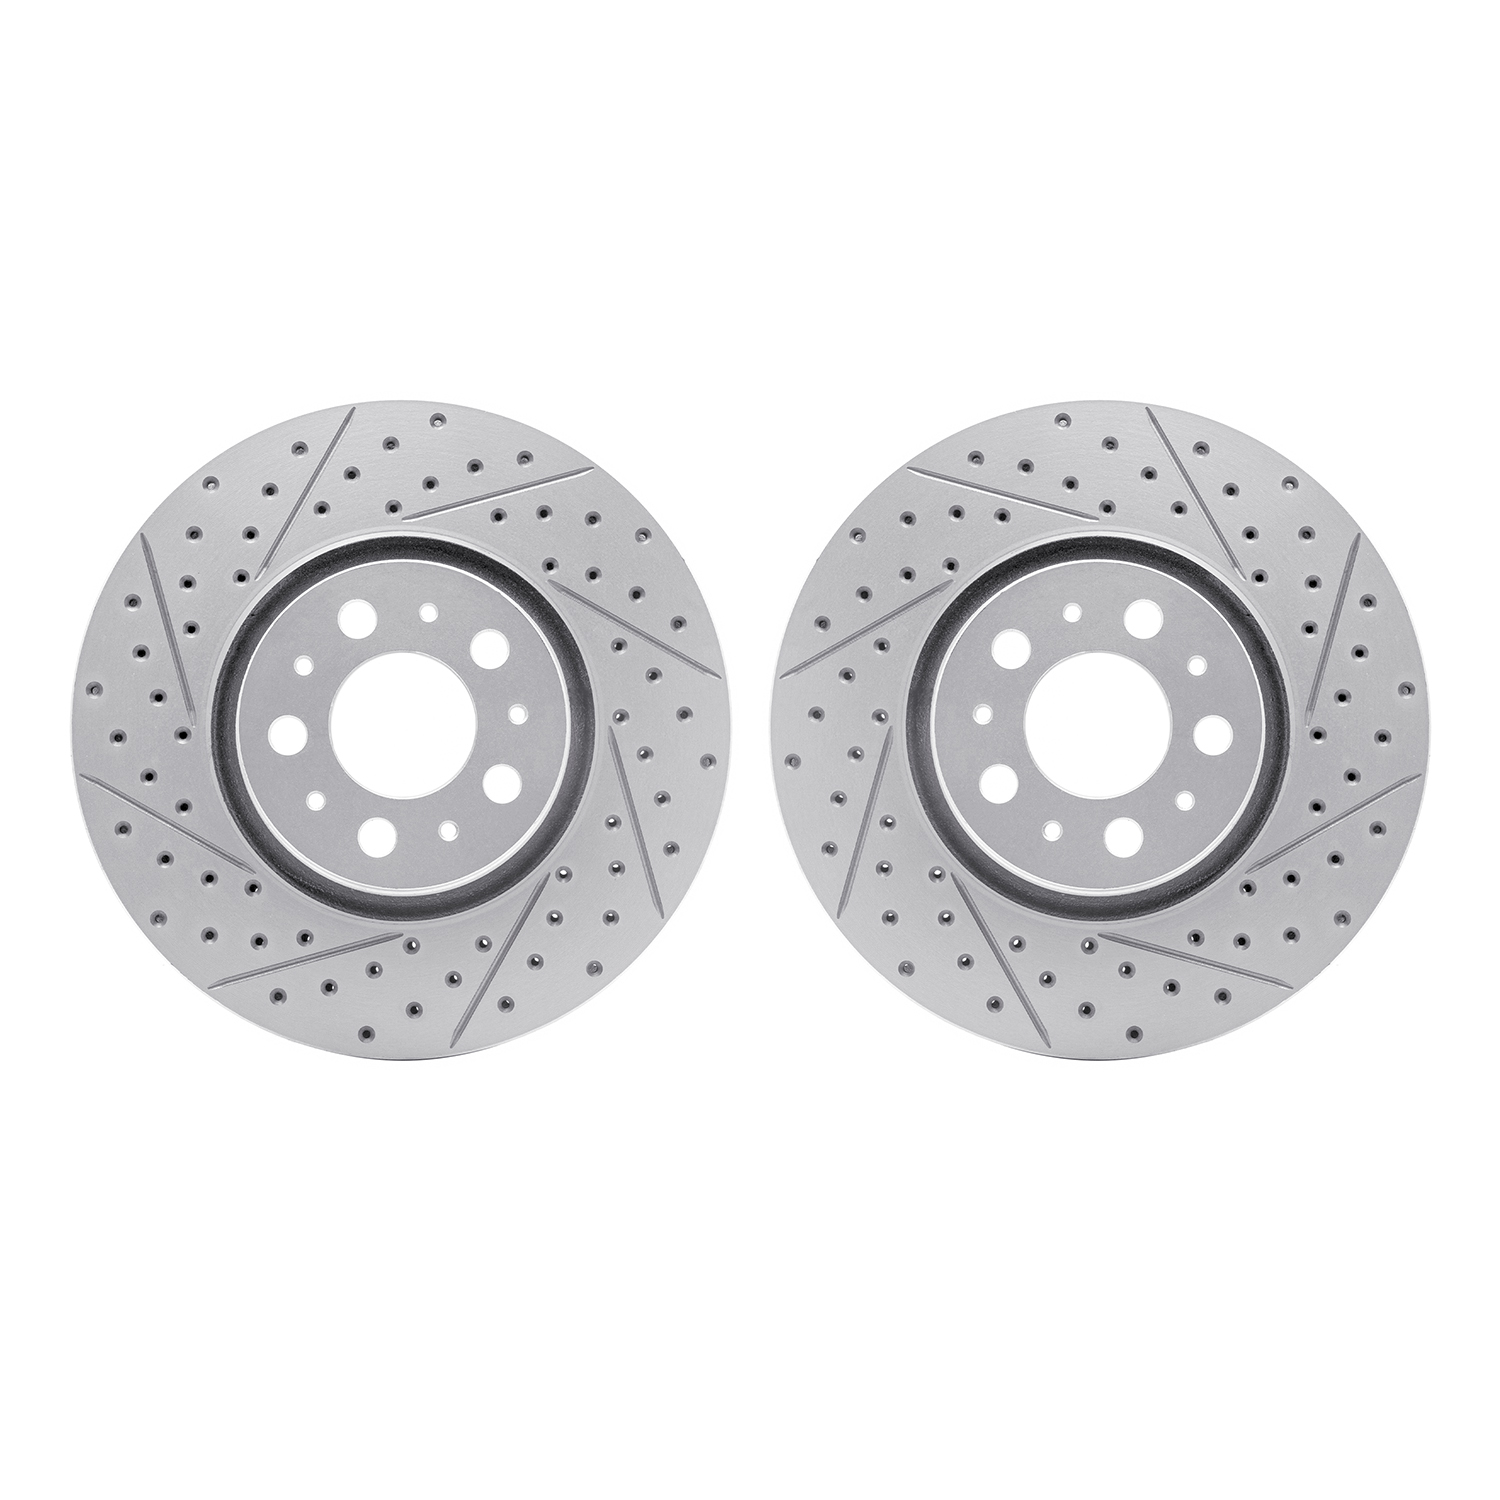 2002-27012 Geoperformance Drilled/Slotted Brake Rotors, 2003-2009 Volvo, Position: Front